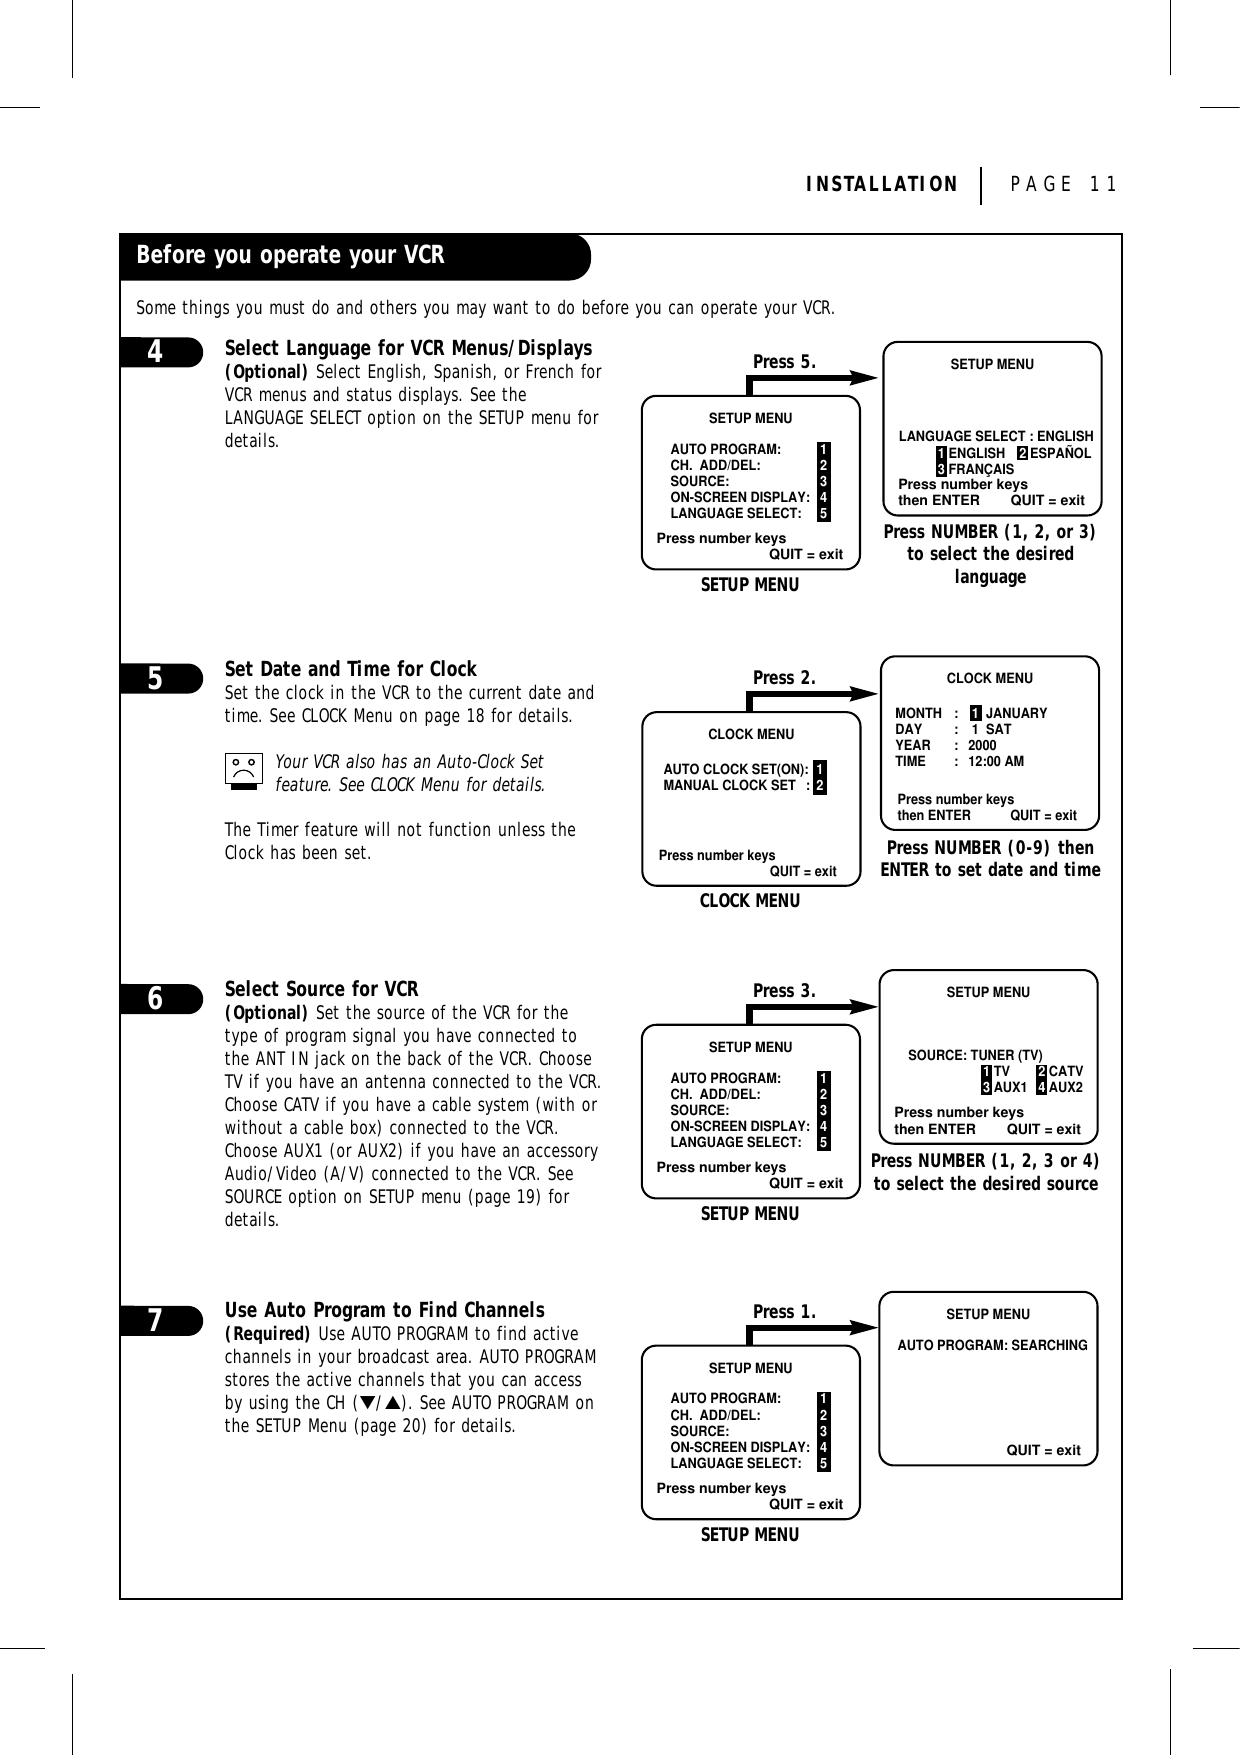 INSTALLATION PAGE 11Before you operate your VCRSome things you must do and others you may want to do before you can operate your VCR.Select Language for VCR Menus/Displays(Optional) Select English, Spanish, or French forVCR menus and status displays. See the LANGUAGE SELECT option on the SETUP menu fordetails.Set Date and Time for ClockSet the clock in the VCR to the current date andtime. See CLOCK Menu on page 18 for details.Your VCR also has an Auto-Clock Set feature. See CLOCK Menu for details.The Timer feature will not function unless theClock has been set.Select Source for VCR(Optional) Set the source of the VCR for thetype of program signal you have connected tothe ANT IN jack on the back of the VCR. ChooseTV if you have an antenna connected to the VCR.Choose CATV if you have a cable system (with orwithout a cable box) connected to the VCR.Choose AUX1 (or AUX2) if you have an accessoryAudio/Video (A/V) connected to the VCR. SeeSOURCE option on SETUP menu (page 19) fordetails.Use Auto Program to Find Channels(Required) Use AUTO PROGRAM to find activechannels in your broadcast area. AUTO PROGRAMstores the active channels that you can accessby using the CH (▼/▲). See AUTO PROGRAM onthe SETUP Menu (page 20) for details.5674CLOCK MENUAUTO CLOCK SET(ON): 1MANUAL CLOCK SET : 2Press number keysQUIT = exitCLOCK MENUMONTH :  1  JANUARYDAY :  1  SATYEAR : 2000TIME : 12:00 AMPress number keysthen ENTER QUIT = exitCLOCK MENUPress NUMBER (0-9) thenENTER to set date and timePress 2.Press number keysQUIT = exitSETUP MENUAUTO PROGRAM: 1CH.  ADD/DEL: 2SOURCE: 3ON-SCREEN DISPLAY: 4LANGUAGE SELECT: 5Press number keysthen ENTER QUIT = exitSETUP MENUSOURCE: TUNER (TV)1 TV 2 CATV3 AUX1 4 AUX2SETUP MENUPress NUMBER (1, 2, 3 or 4)to select the desired sourcePress 3.Press number keysQUIT = exitSETUP MENUAUTO PROGRAM: 1CH.  ADD/DEL: 2SOURCE: 3ON-SCREEN DISPLAY: 4LANGUAGE SELECT: 5QUIT = exitSETUP MENUAUTO PROGRAM: SEARCHINGSETUP MENUPress 1.Press number keysQUIT = exitSETUP MENUAUTO PROGRAM: 1CH.  ADD/DEL: 2SOURCE: 3ON-SCREEN DISPLAY: 4LANGUAGE SELECT: 5Press number keysthen ENTER QUIT = exitSETUP MENULANGUAGE SELECT : ENGLISH           1 ENGLISH    2 ESPAÑOL           3 FRANÇAISSETUP MENUPress NUMBER (1, 2, or 3)to select the desired languagePress 5.